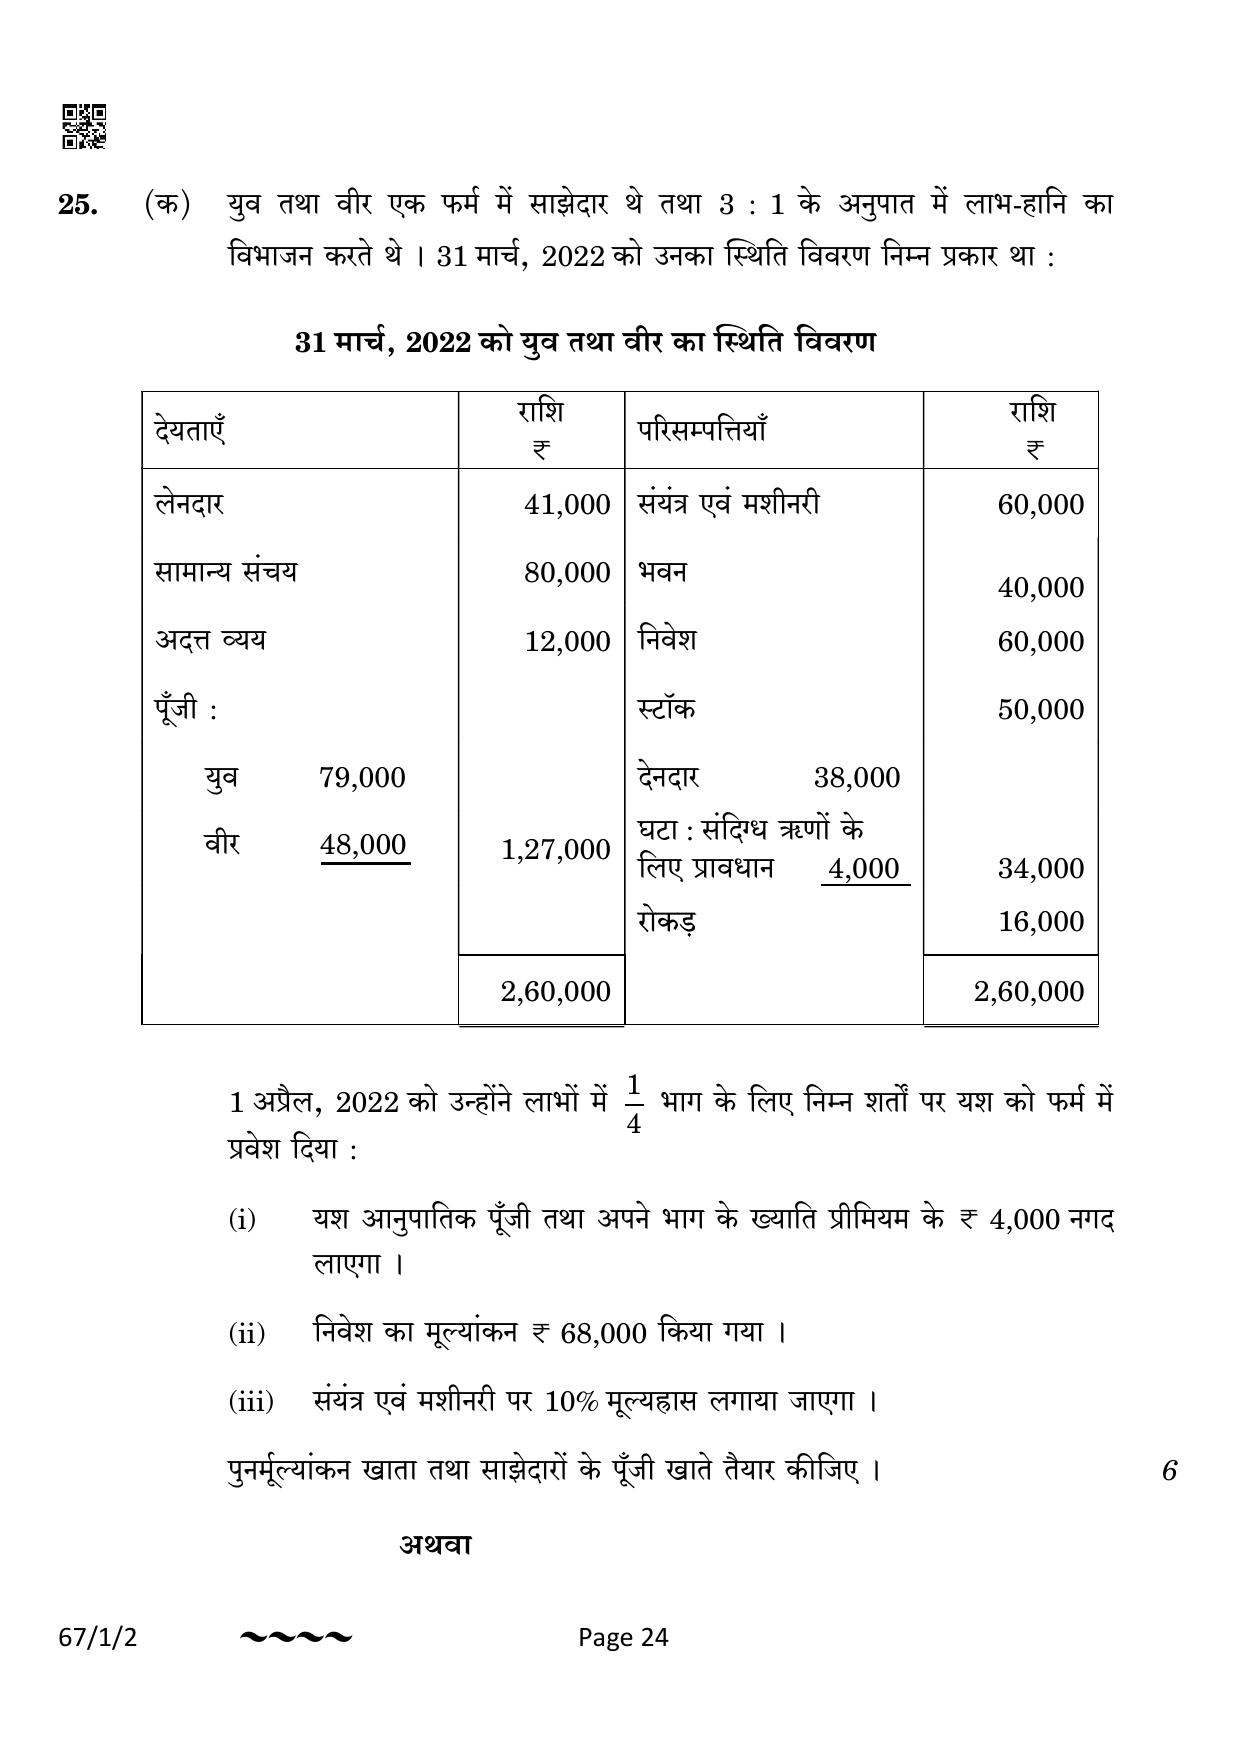 CBSE Class 12 67-1-2 Accountancy 2023 Question Paper - Page 24